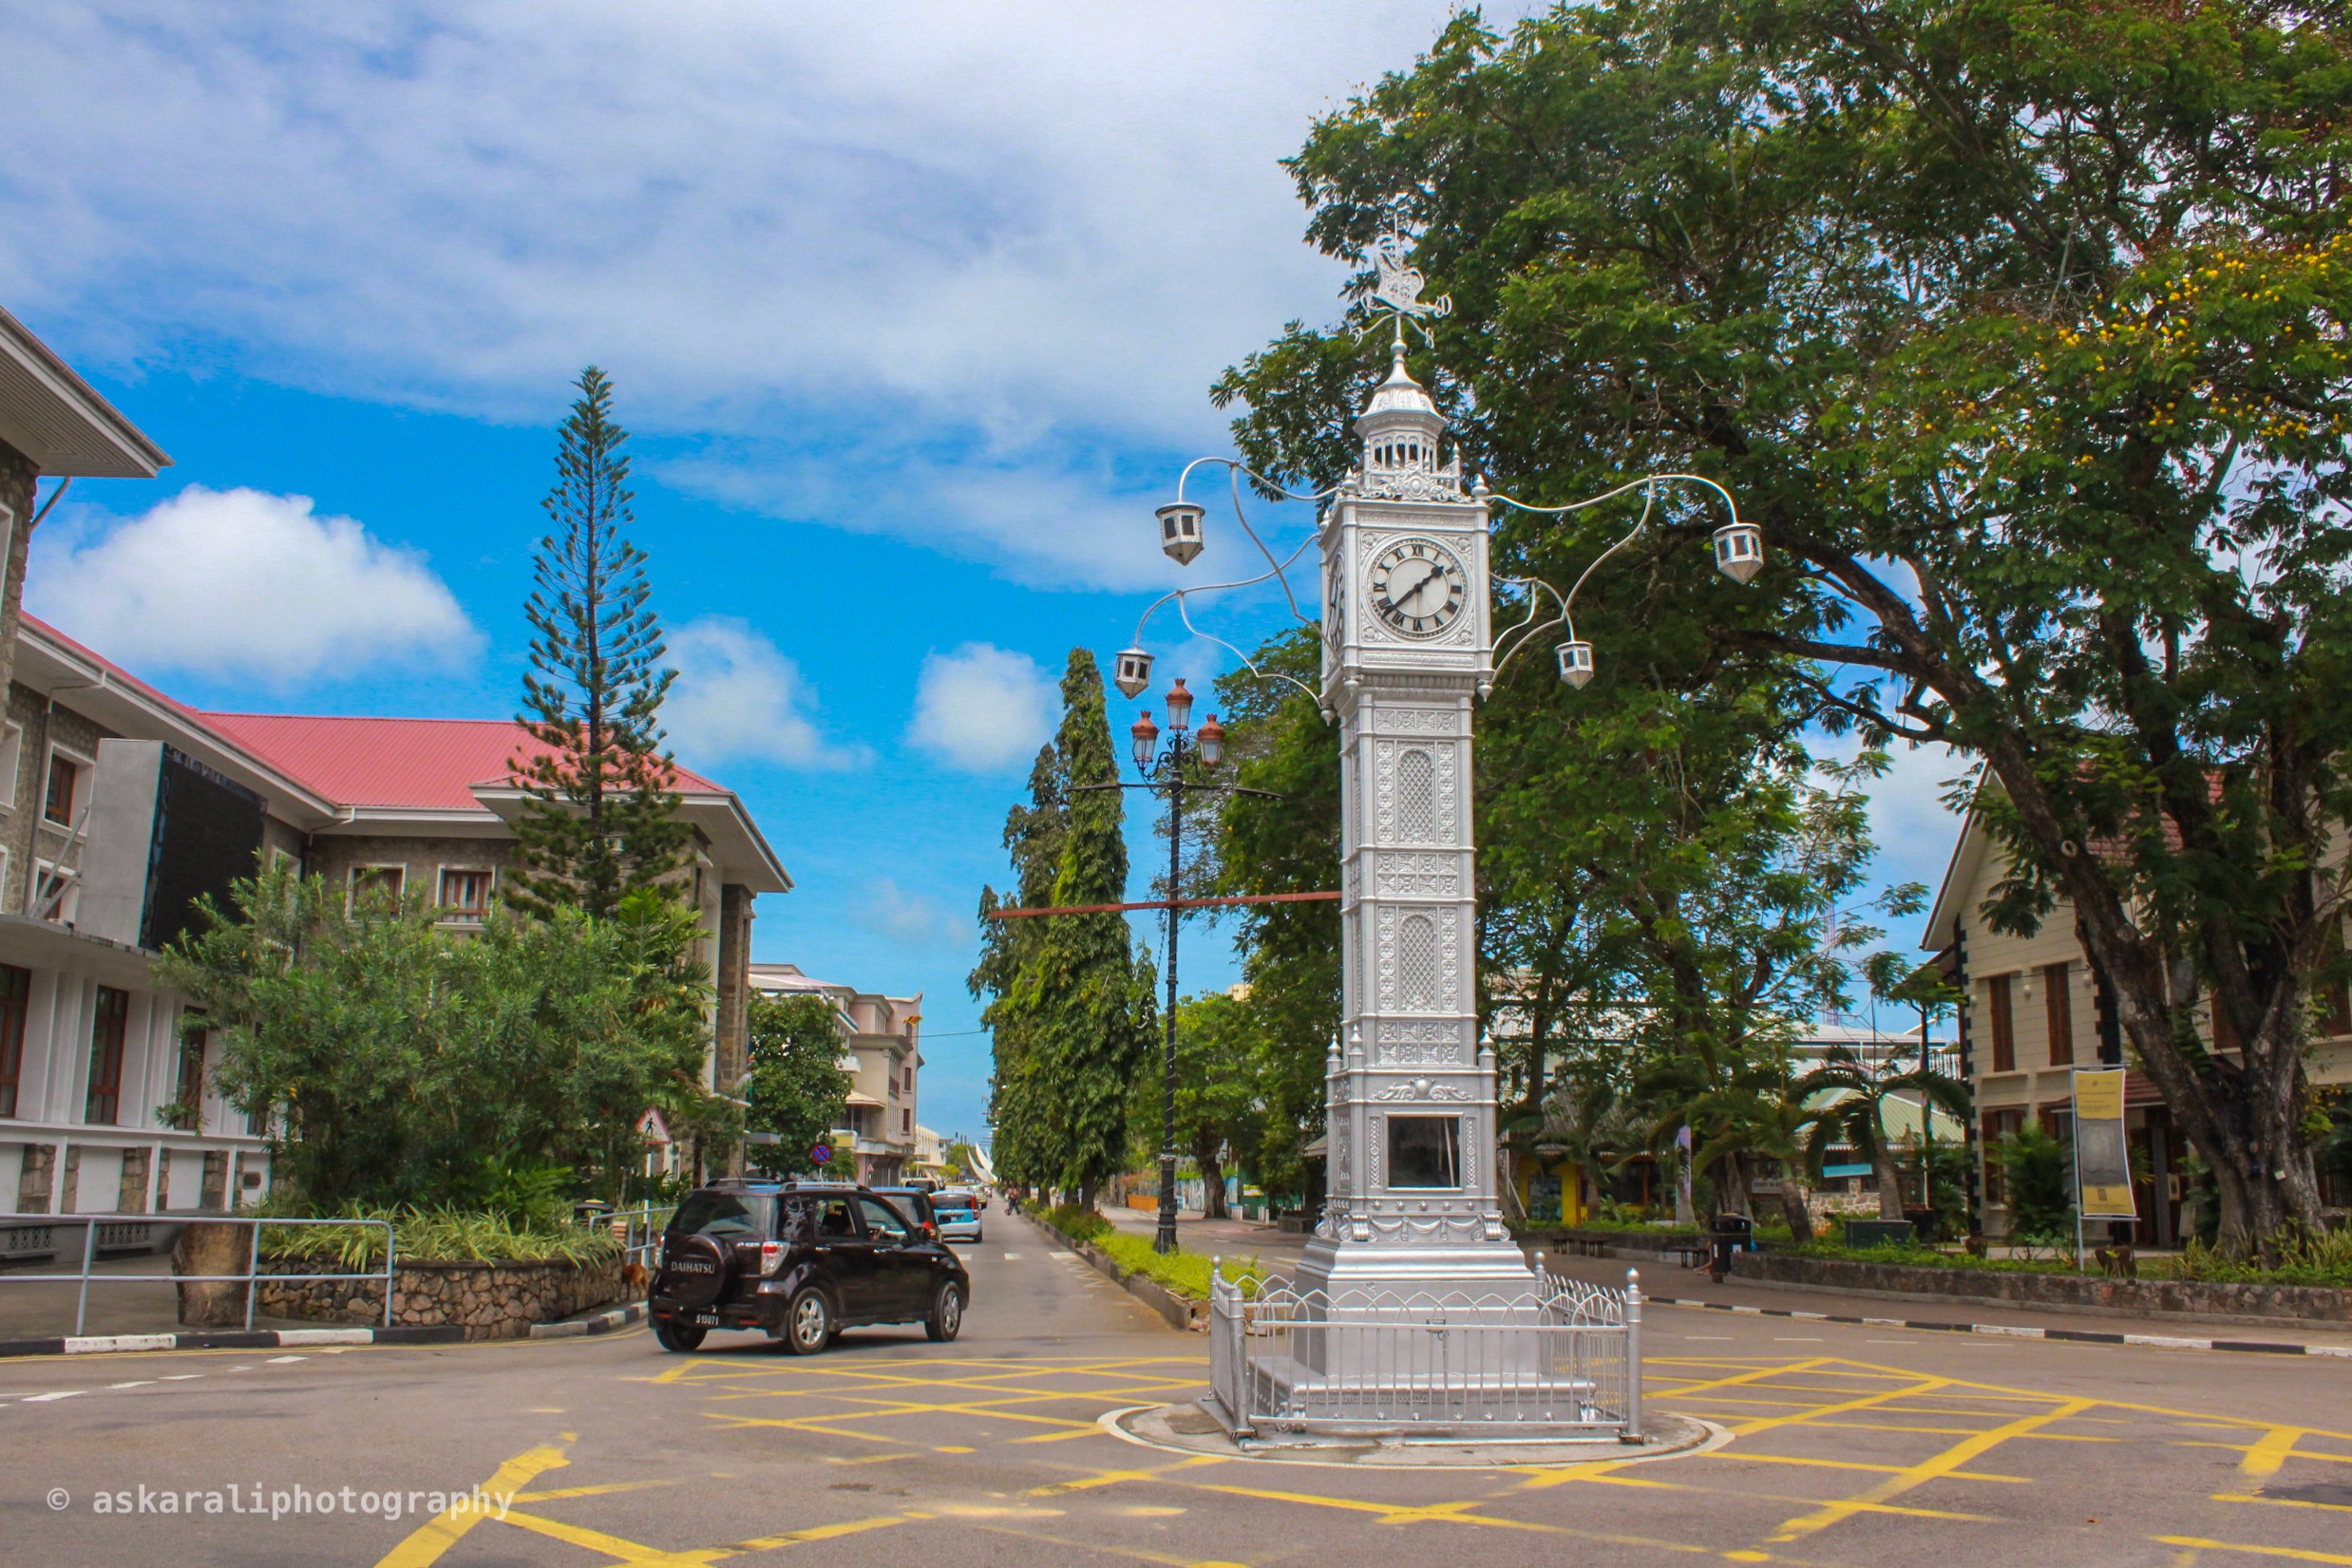 The victoria clocktower Is the most prominent feature of Seychelle’s small capital and has acted as a focal point for nearly 100 years. While all around massive transformation has taken place in the town, the clocktower virtually unchanged.